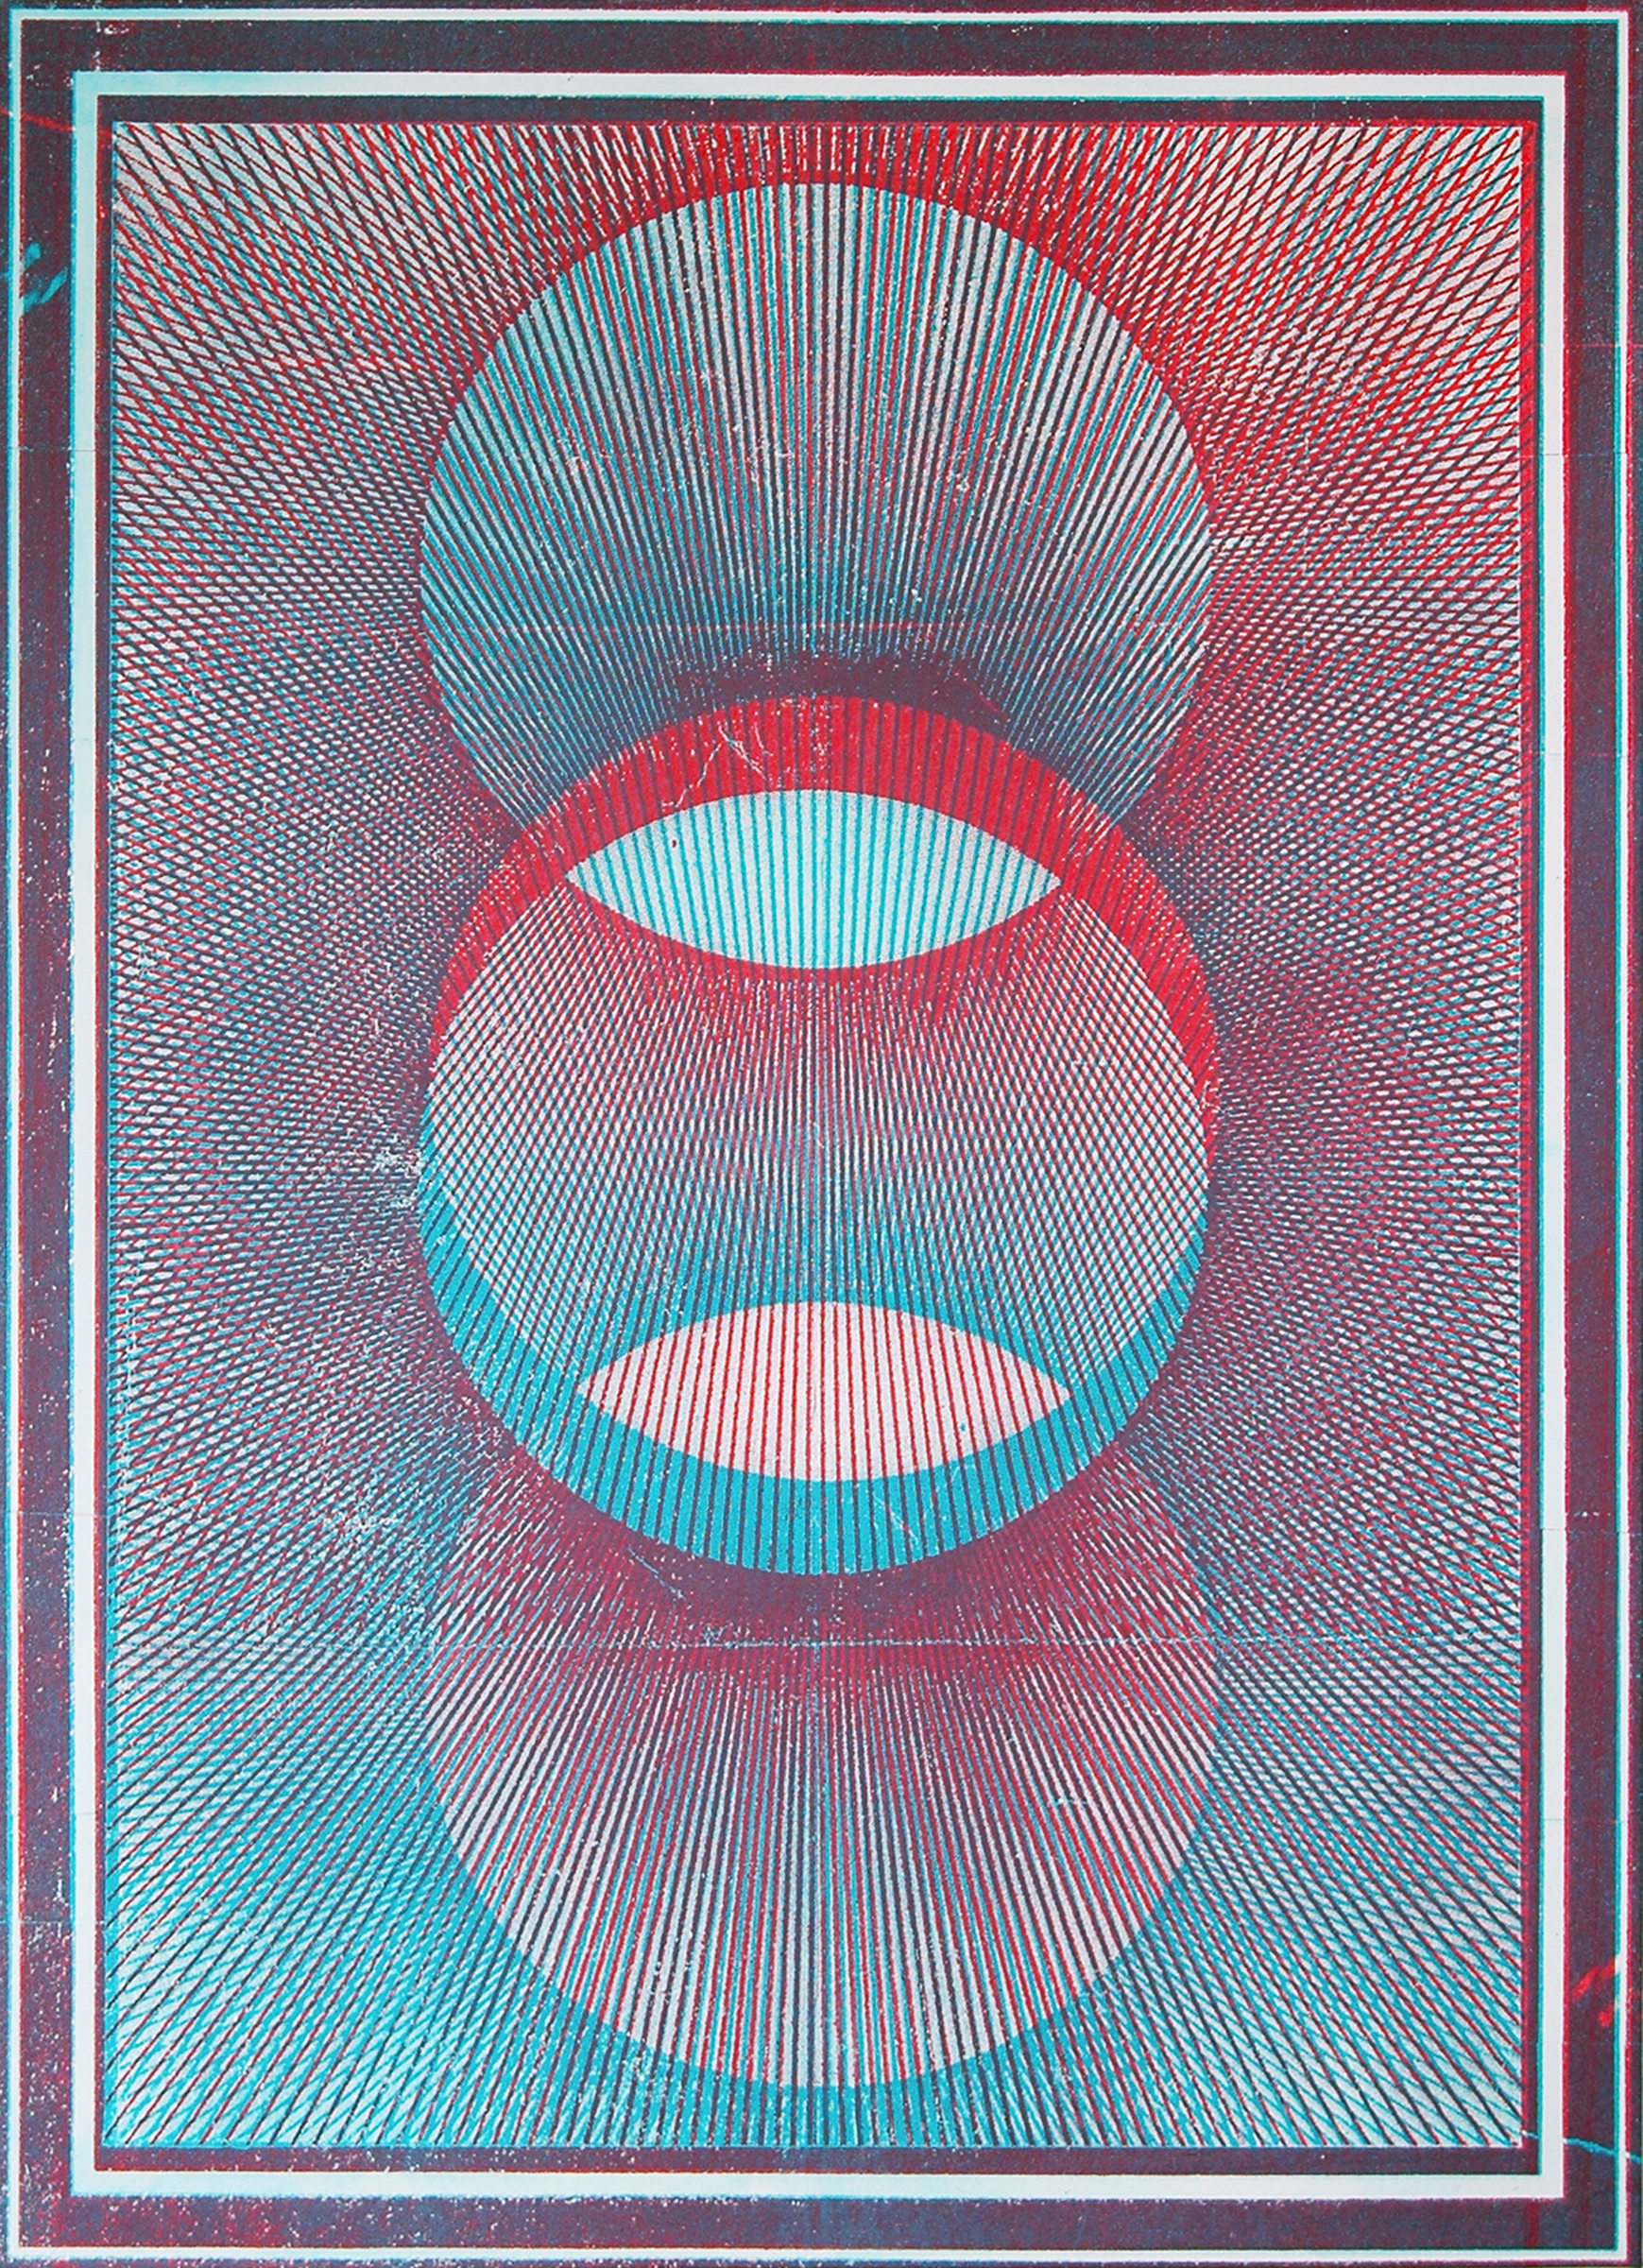   GWENAËL RATTKE   Projections II (red &amp; blue) , 2012, acrylic silkscreen on canvas with hand working, 49" x 35.5" 